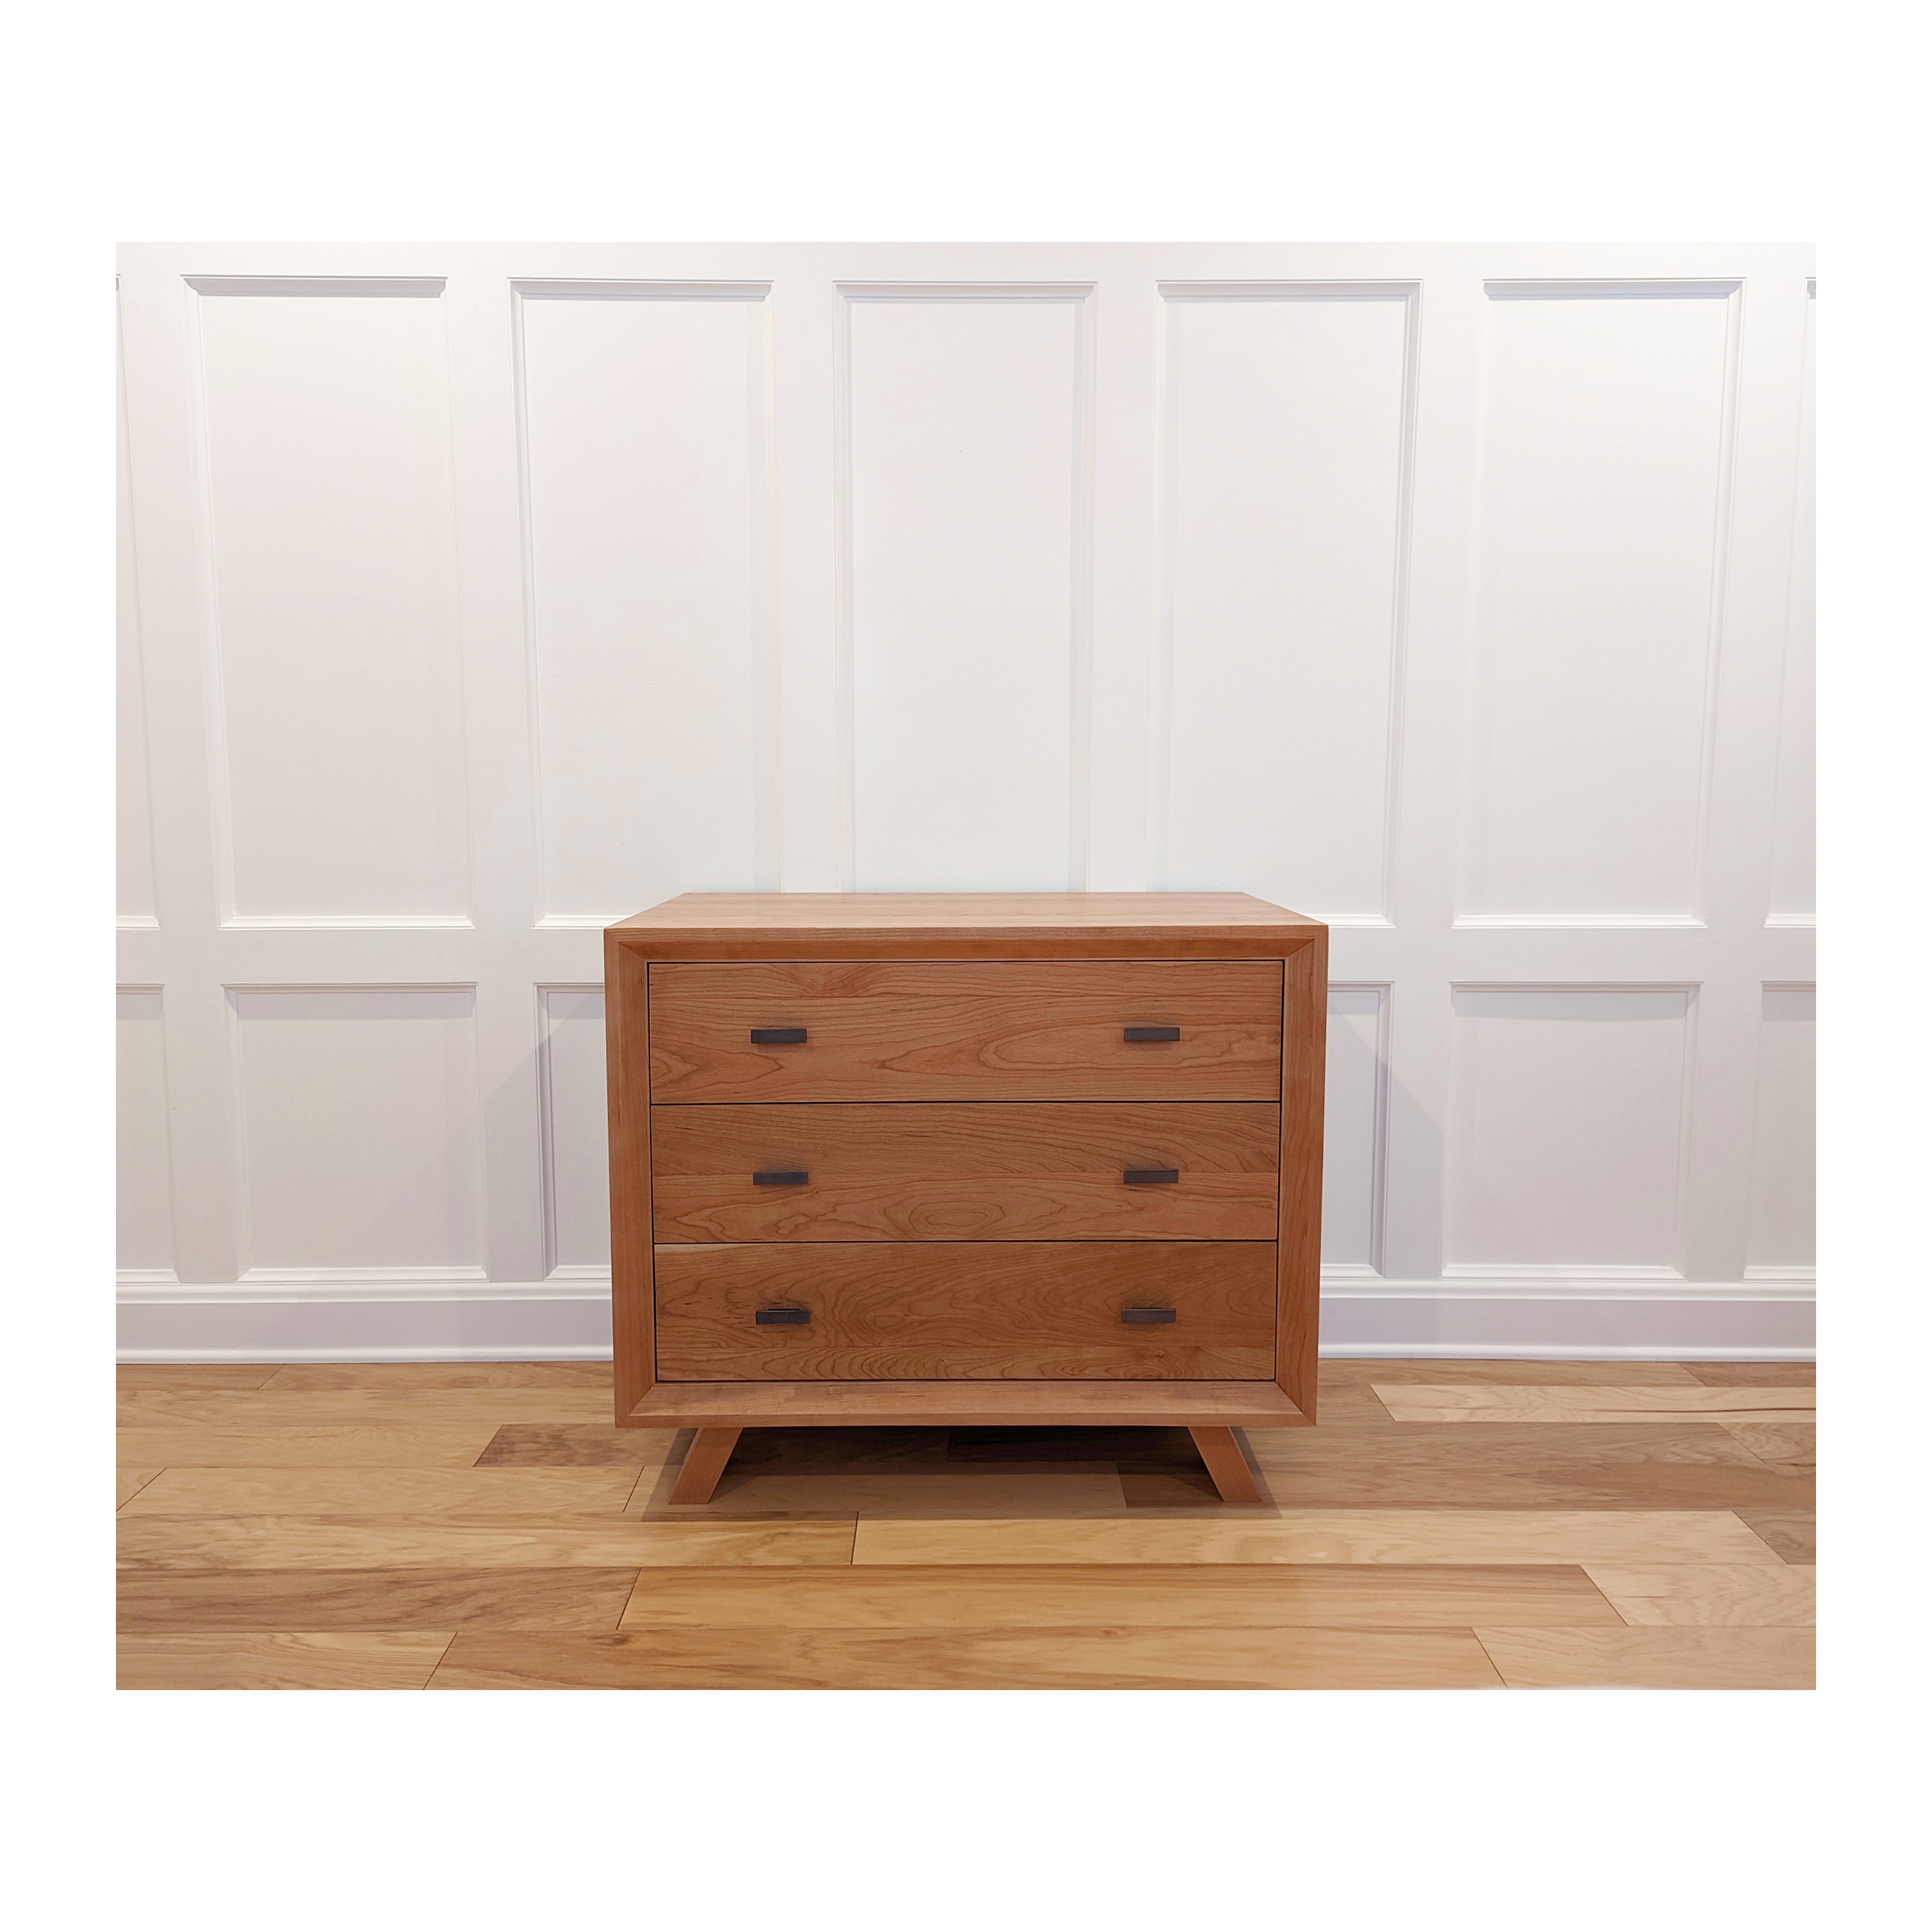 Series 555 Dresser With Three Drawers At 36″ In Width